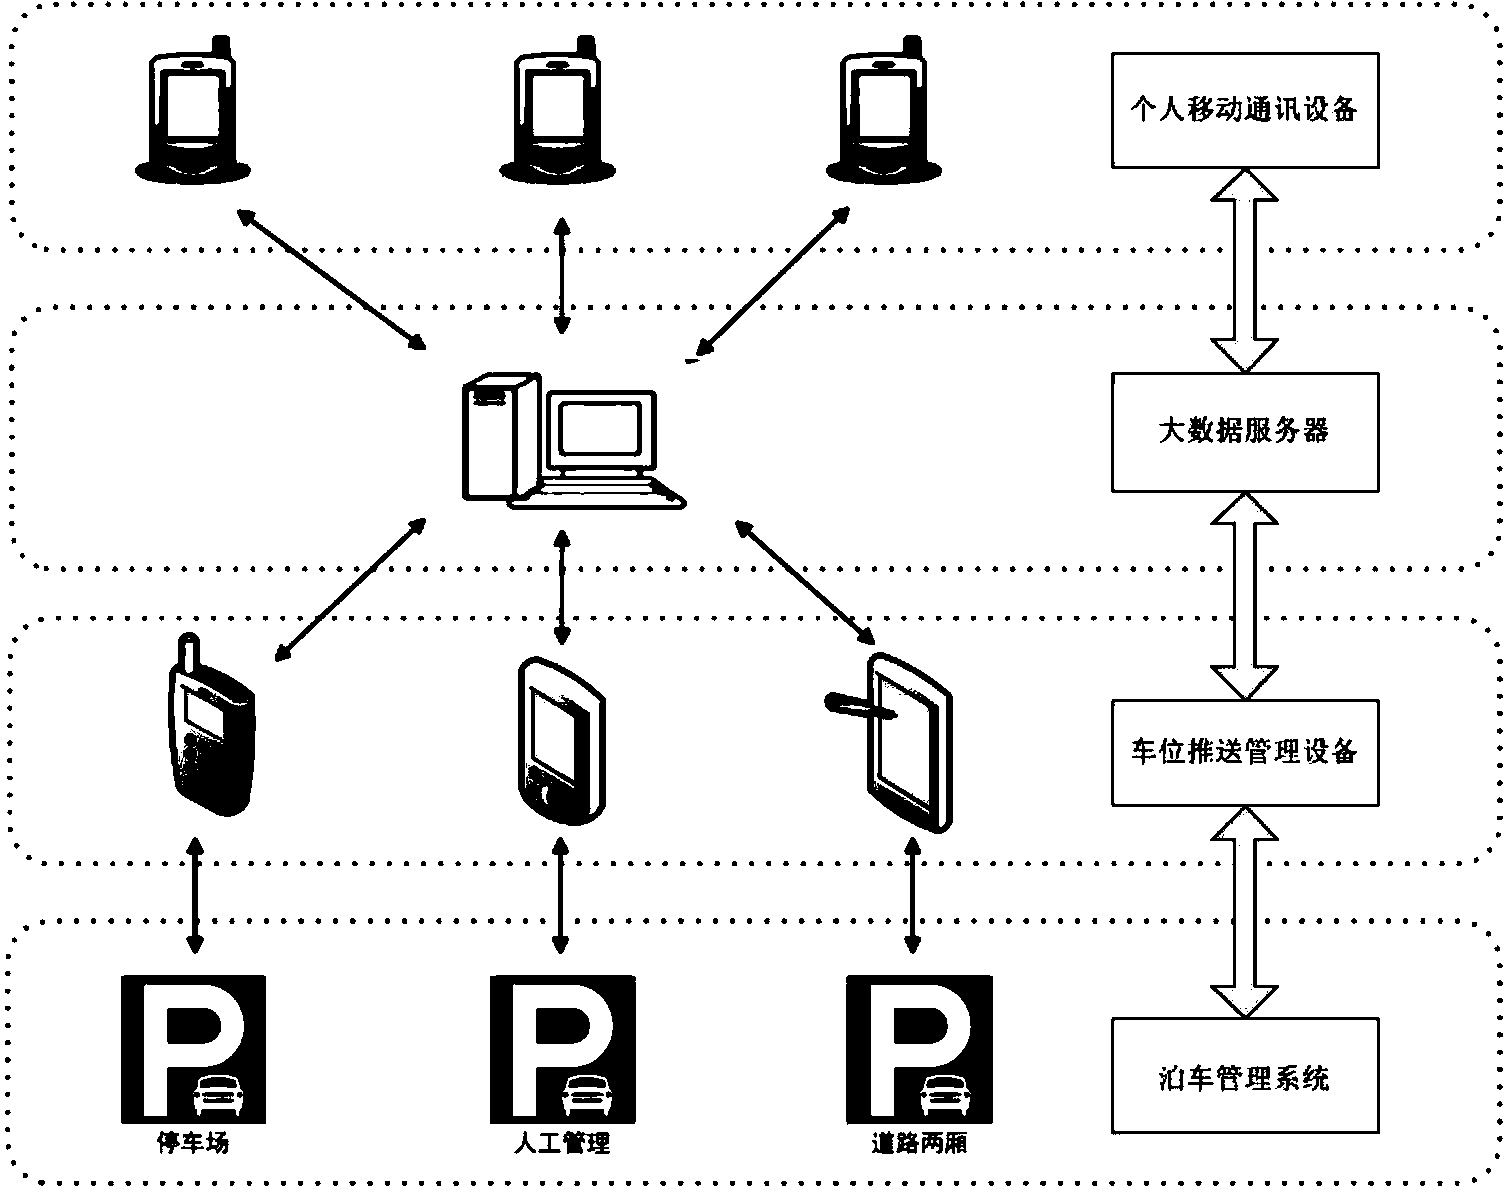 Intelligent parking service system for cities and parking scheduling method